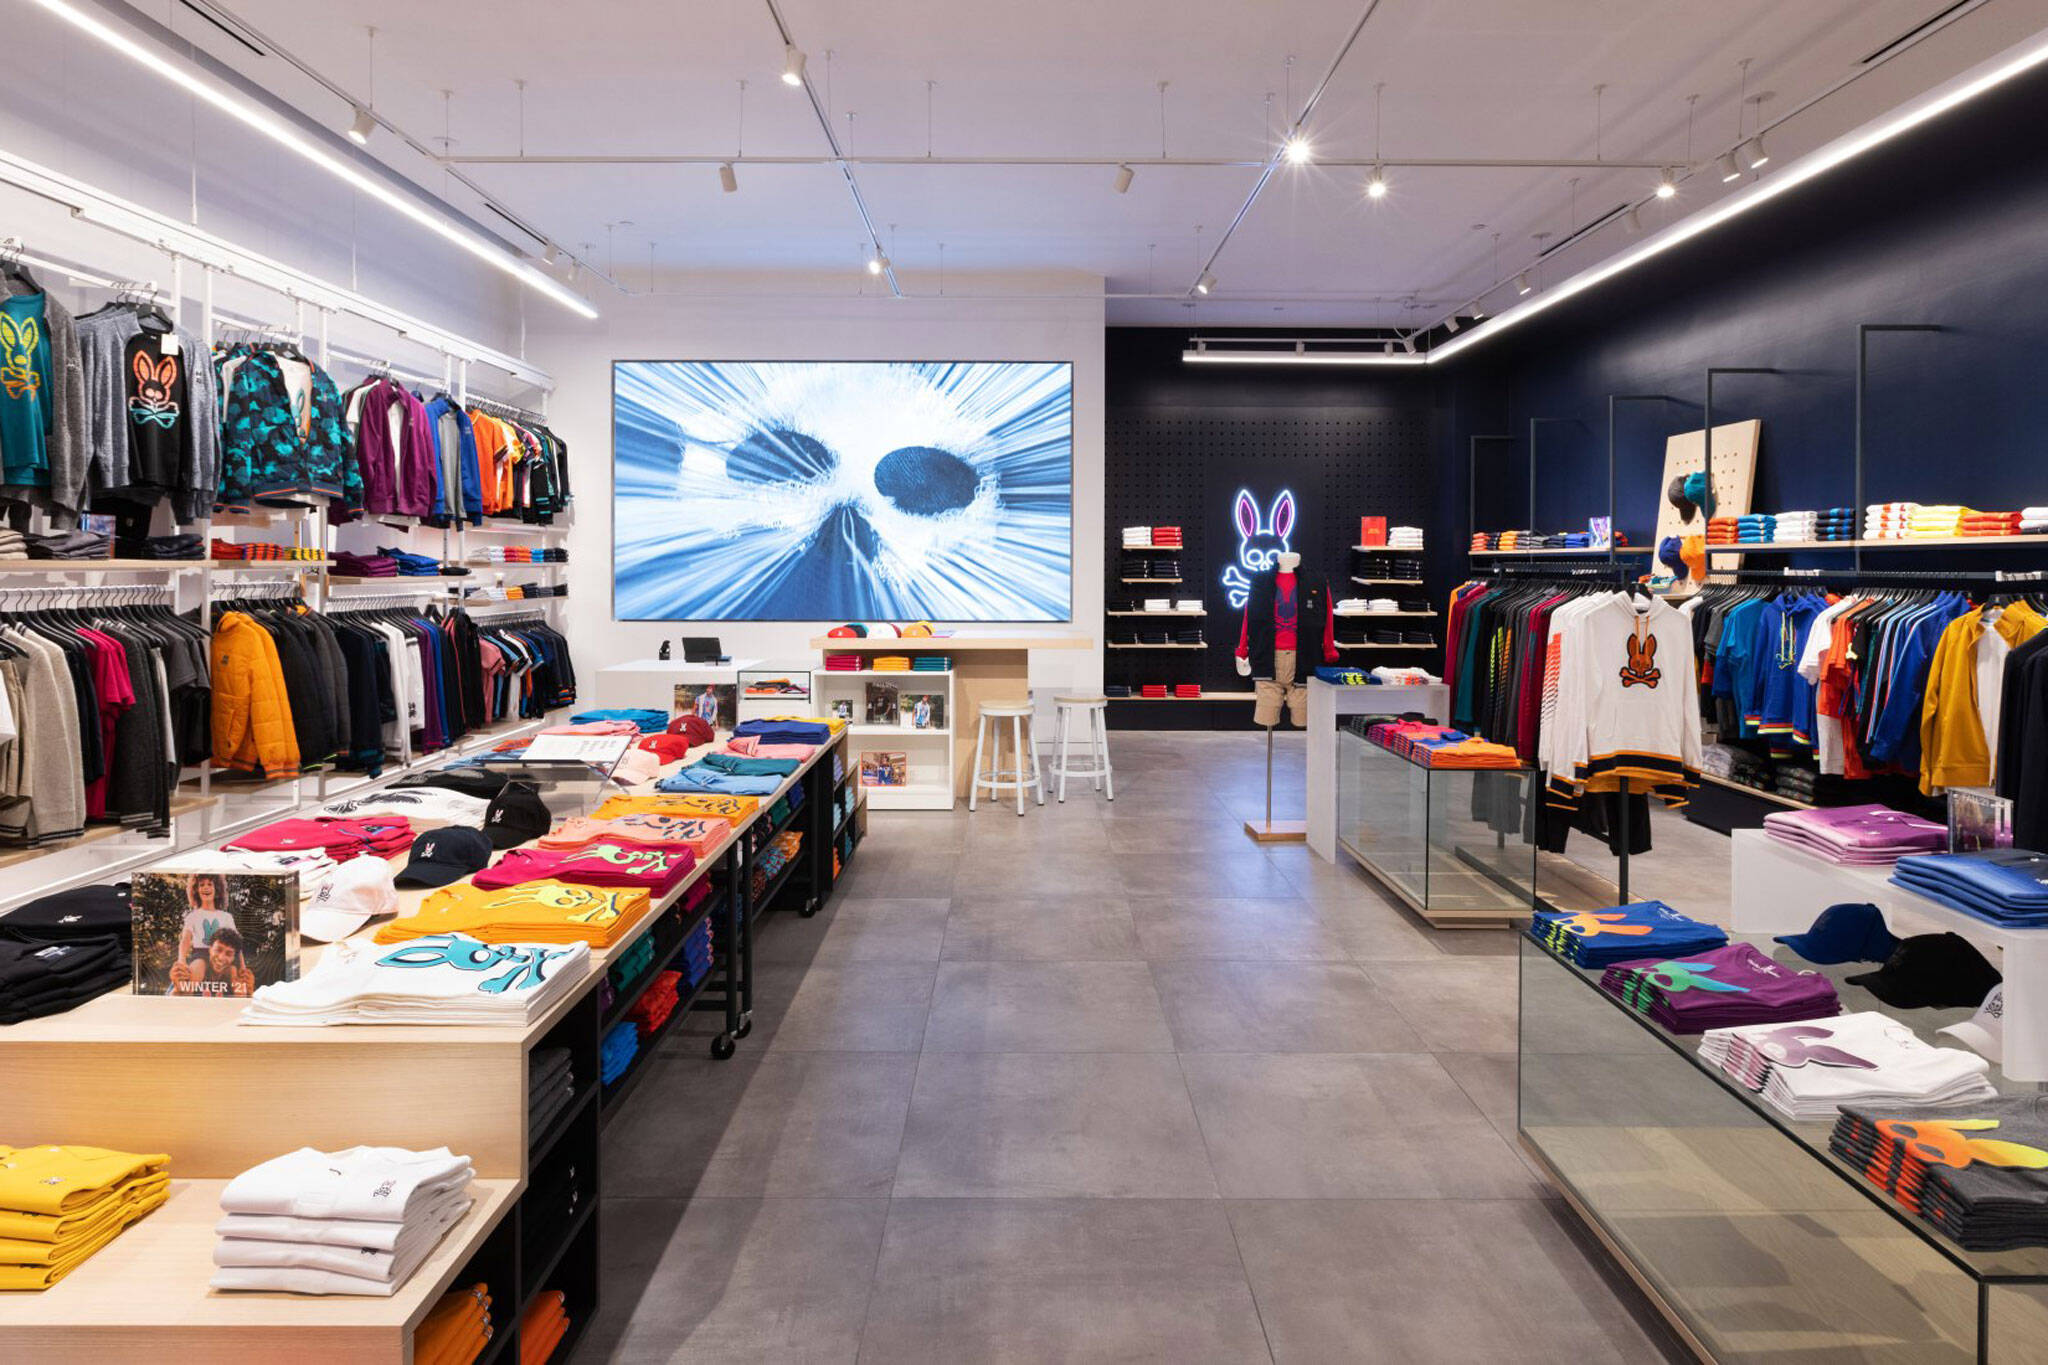 Popular North American clothing brand is opening its first Toronto store